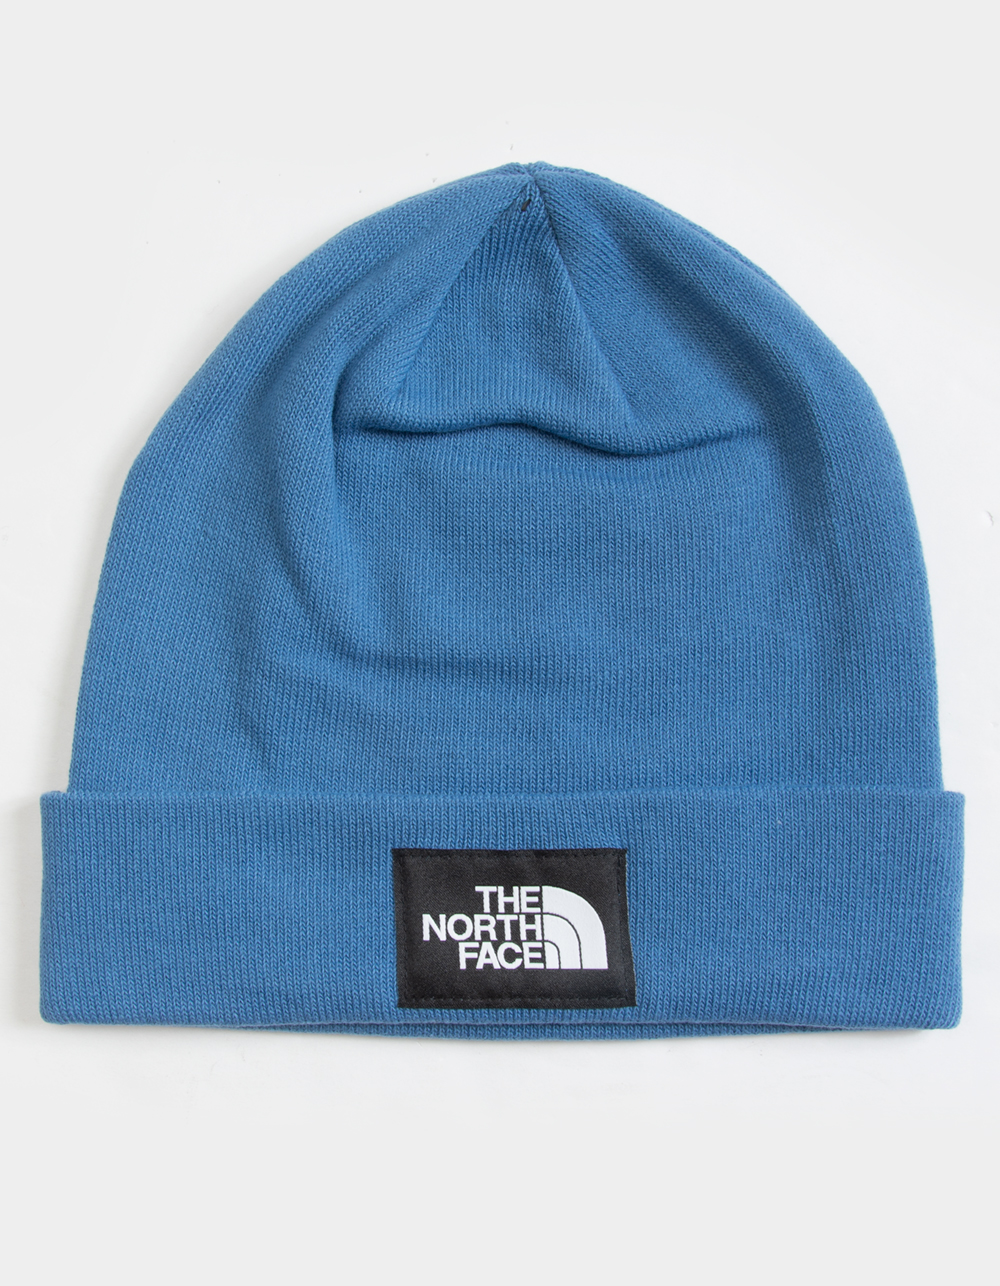 THE NORTH FACE Dock Worker Recycled Beanie - ROYAL | Tillys